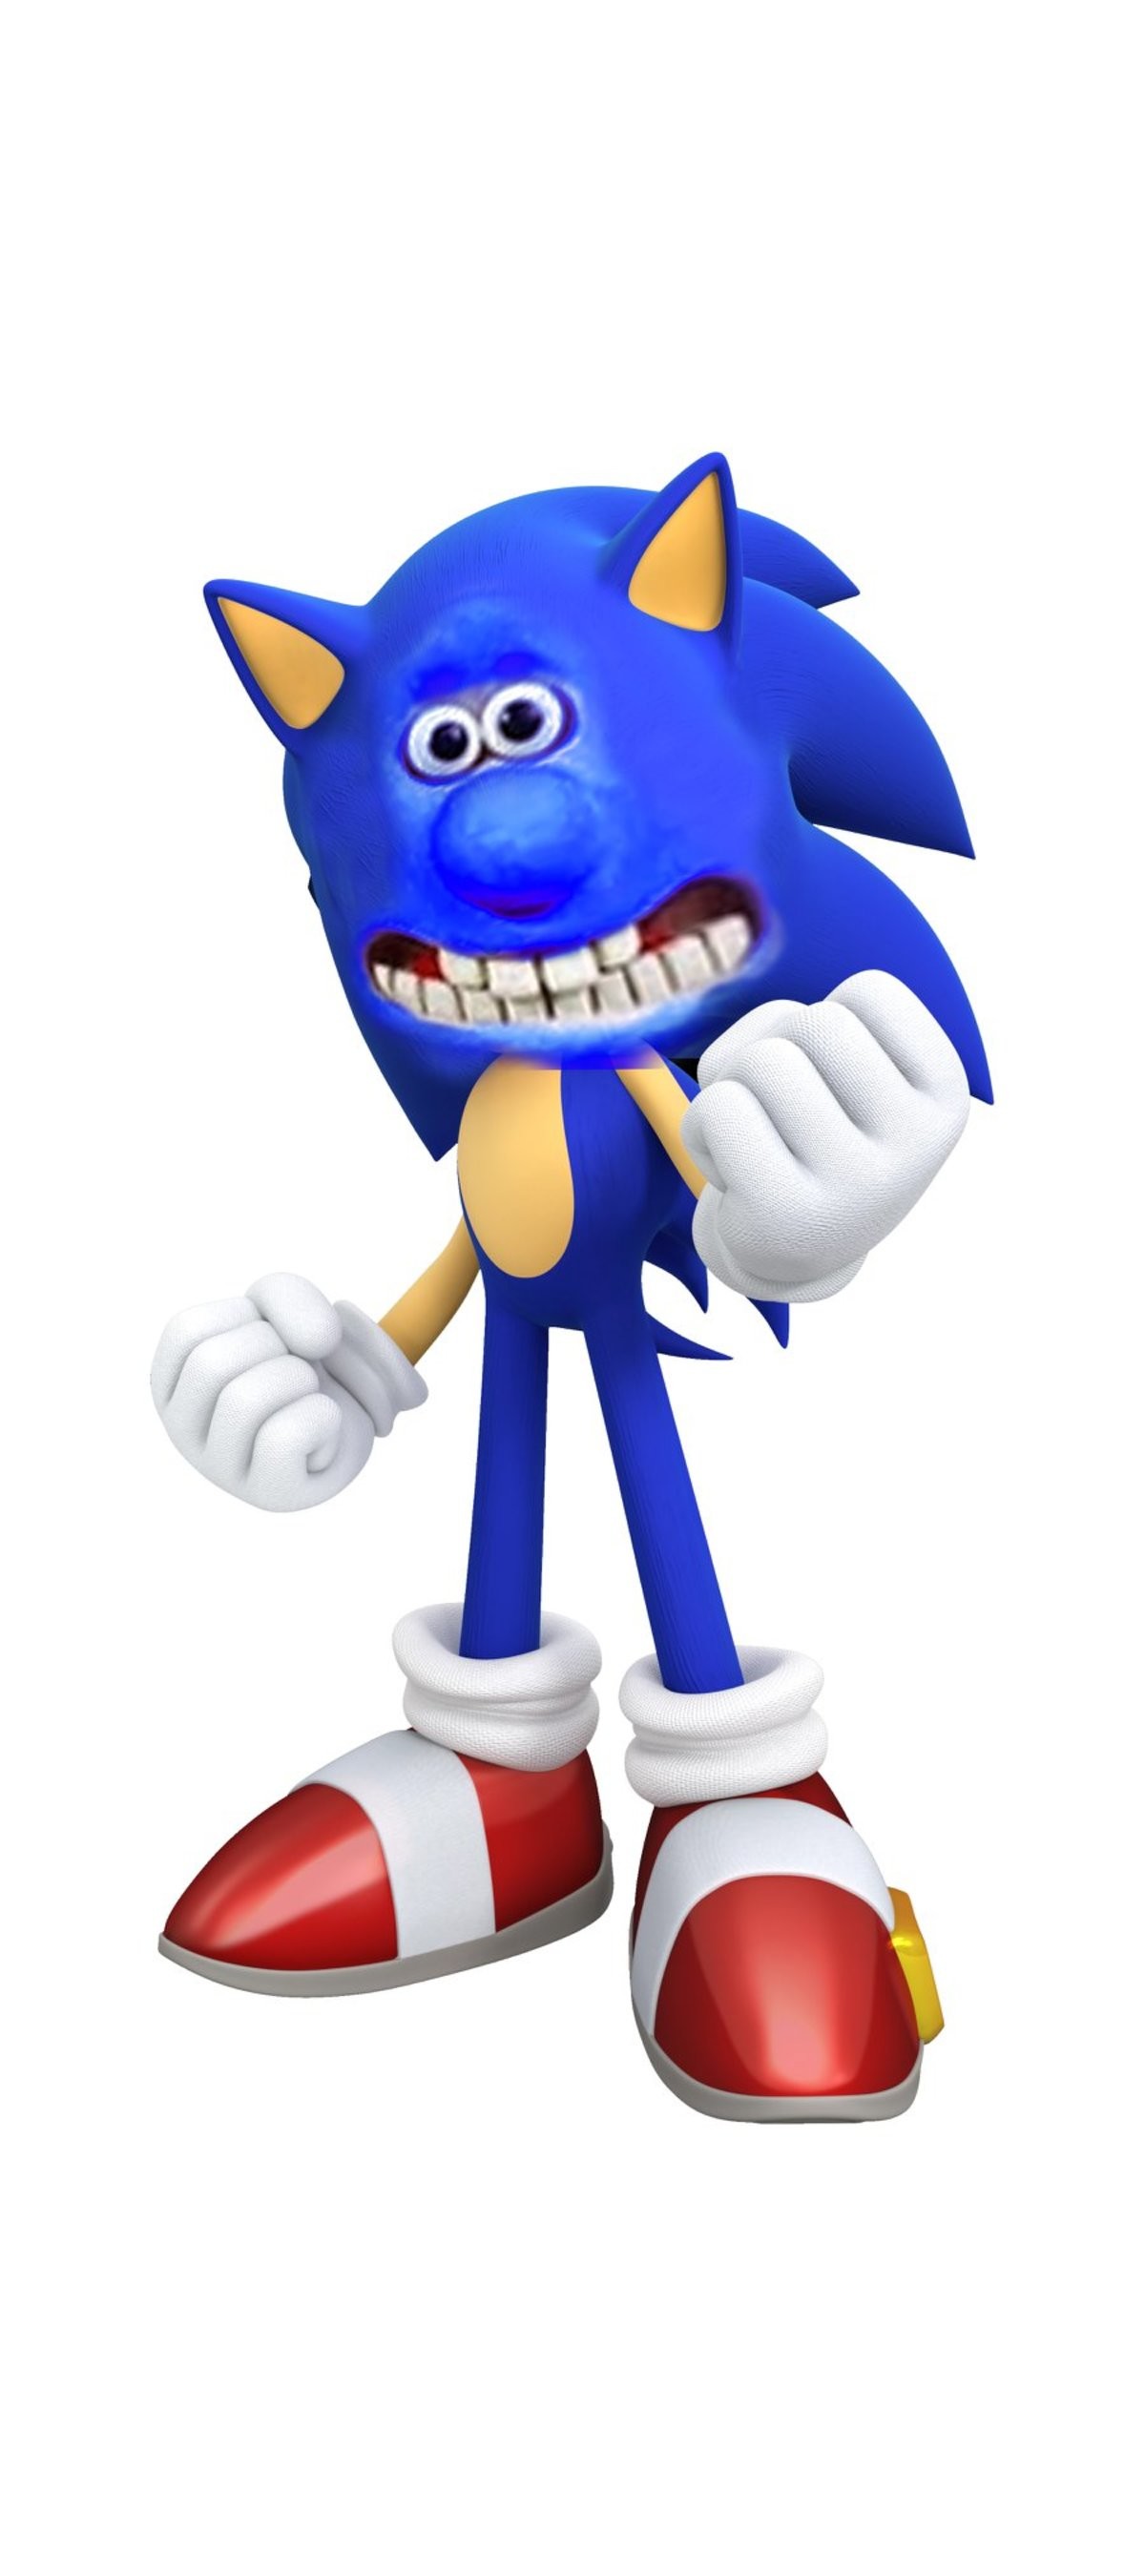 New sonic redesign looks great.